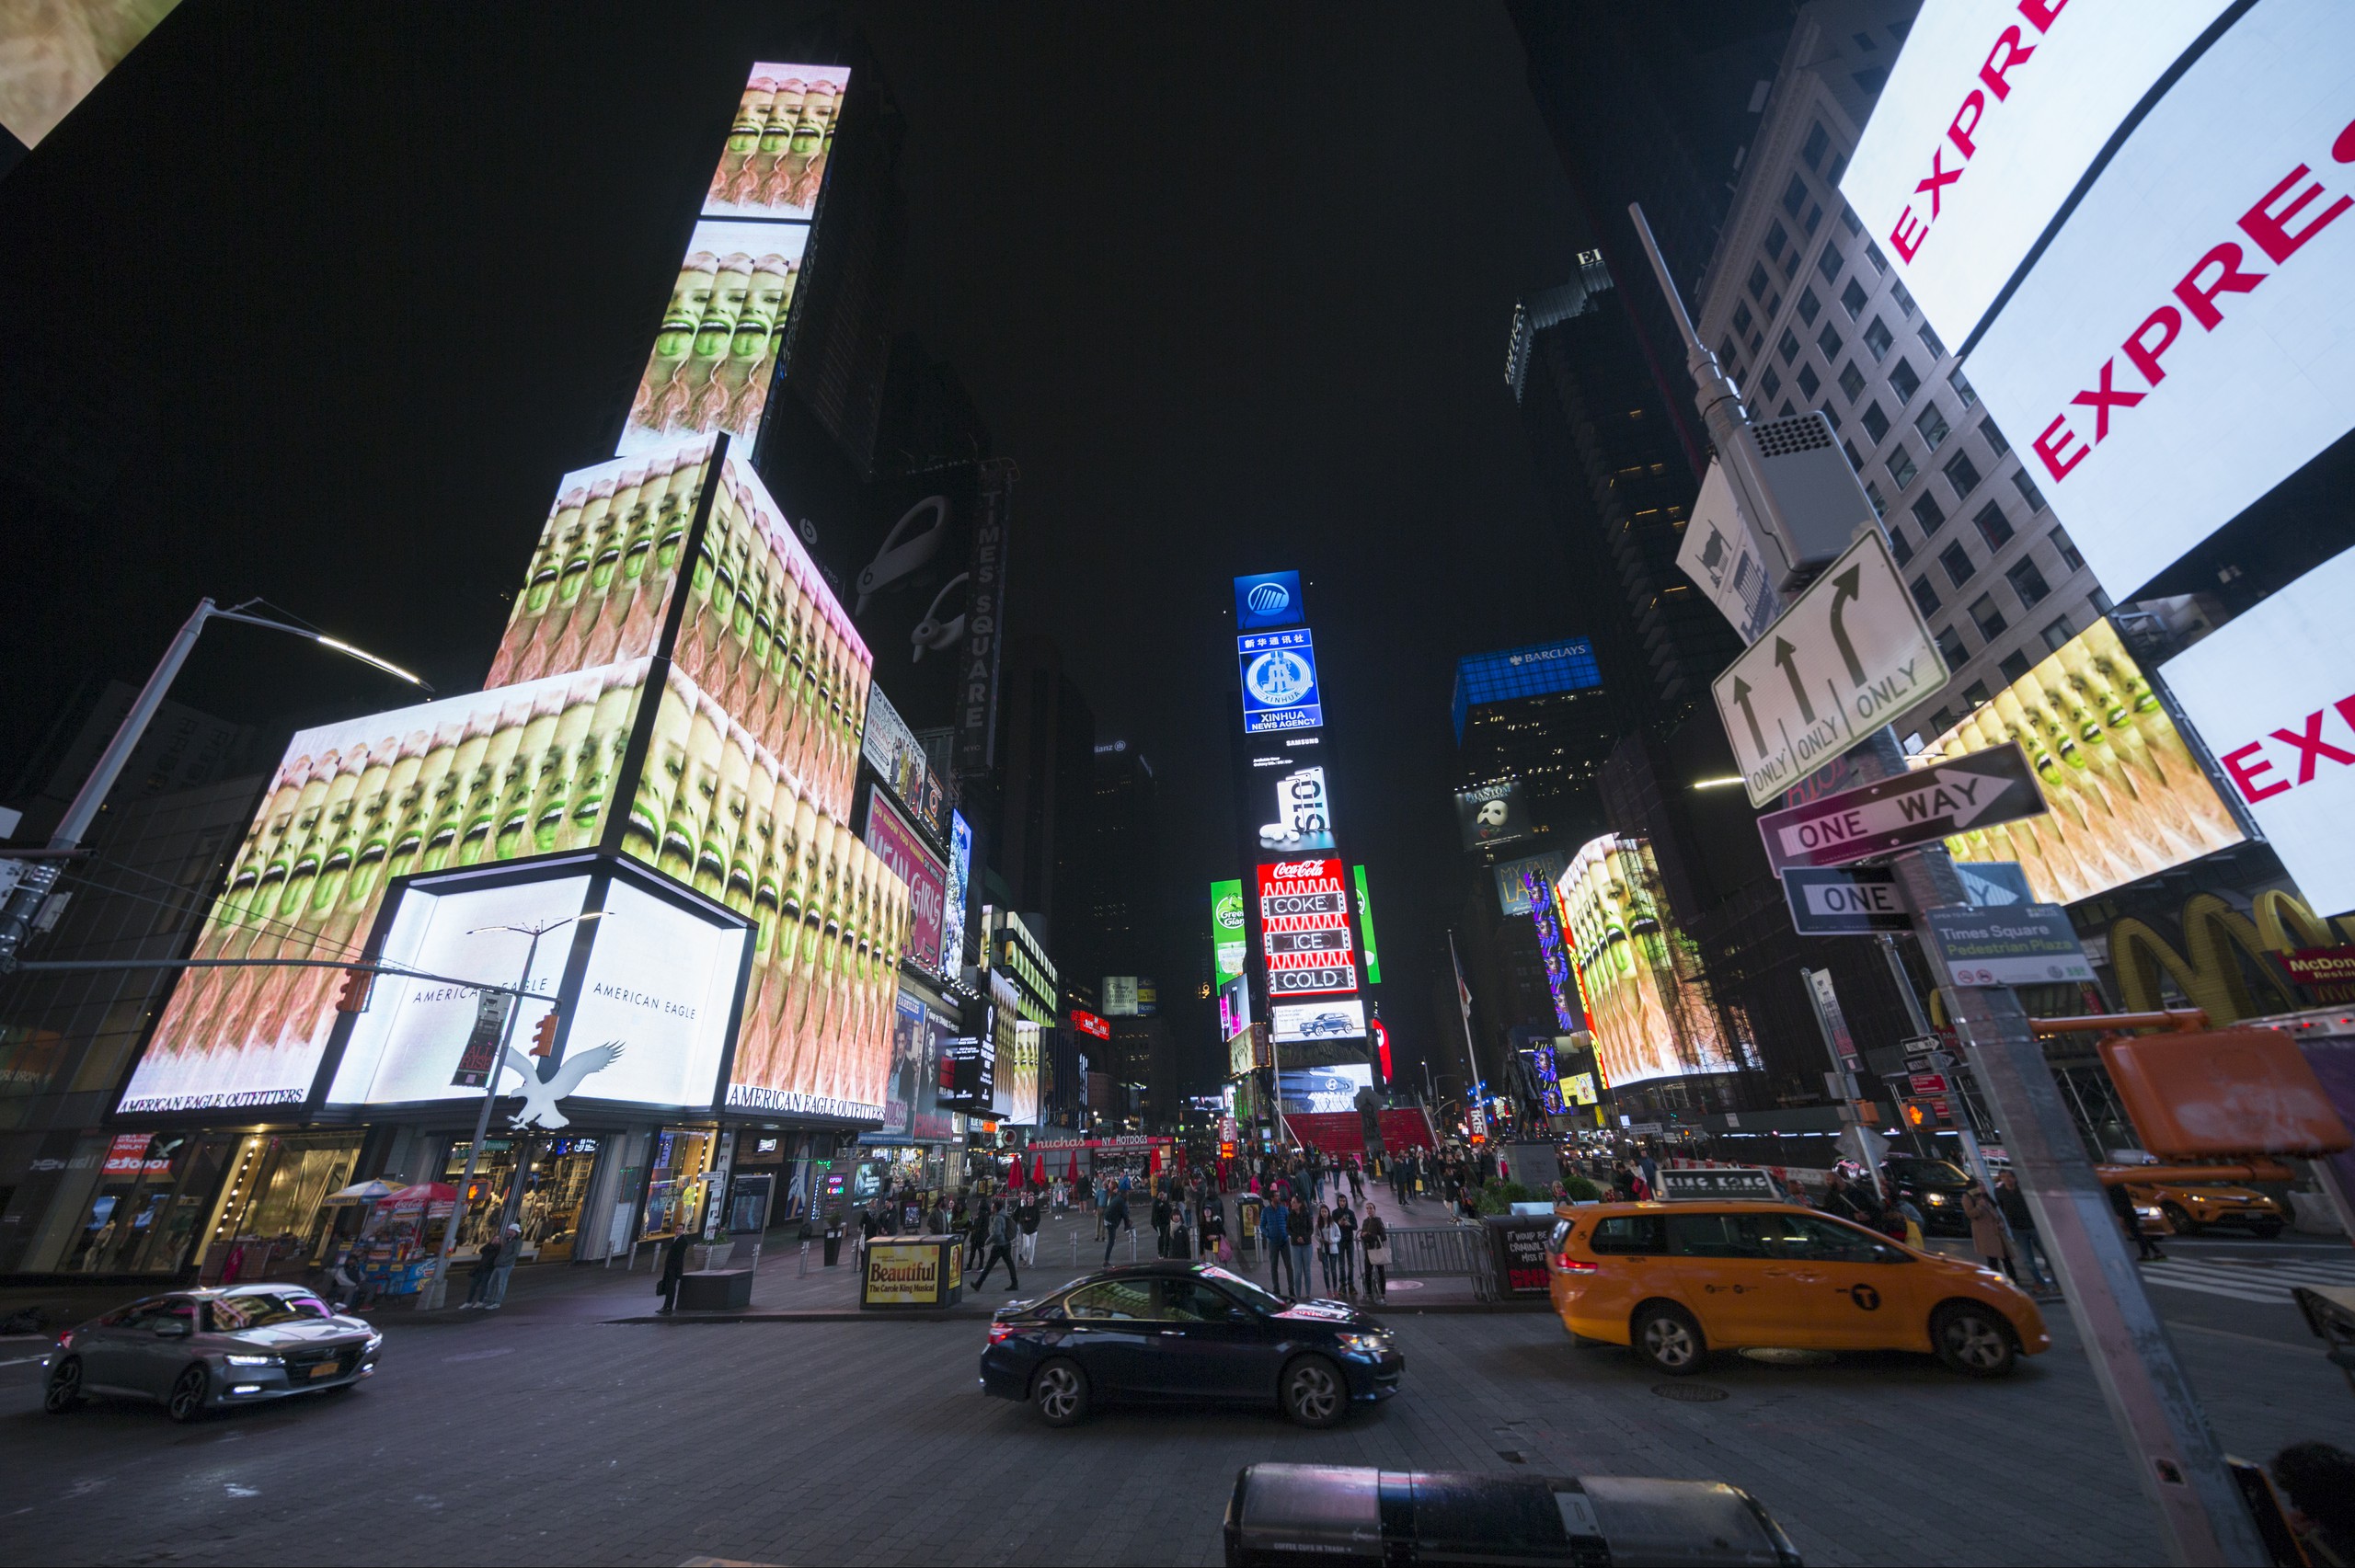 Installation view, PINK_PARA_1STCHOICE, Times Square’s Electronic Billboards, New York, 2019